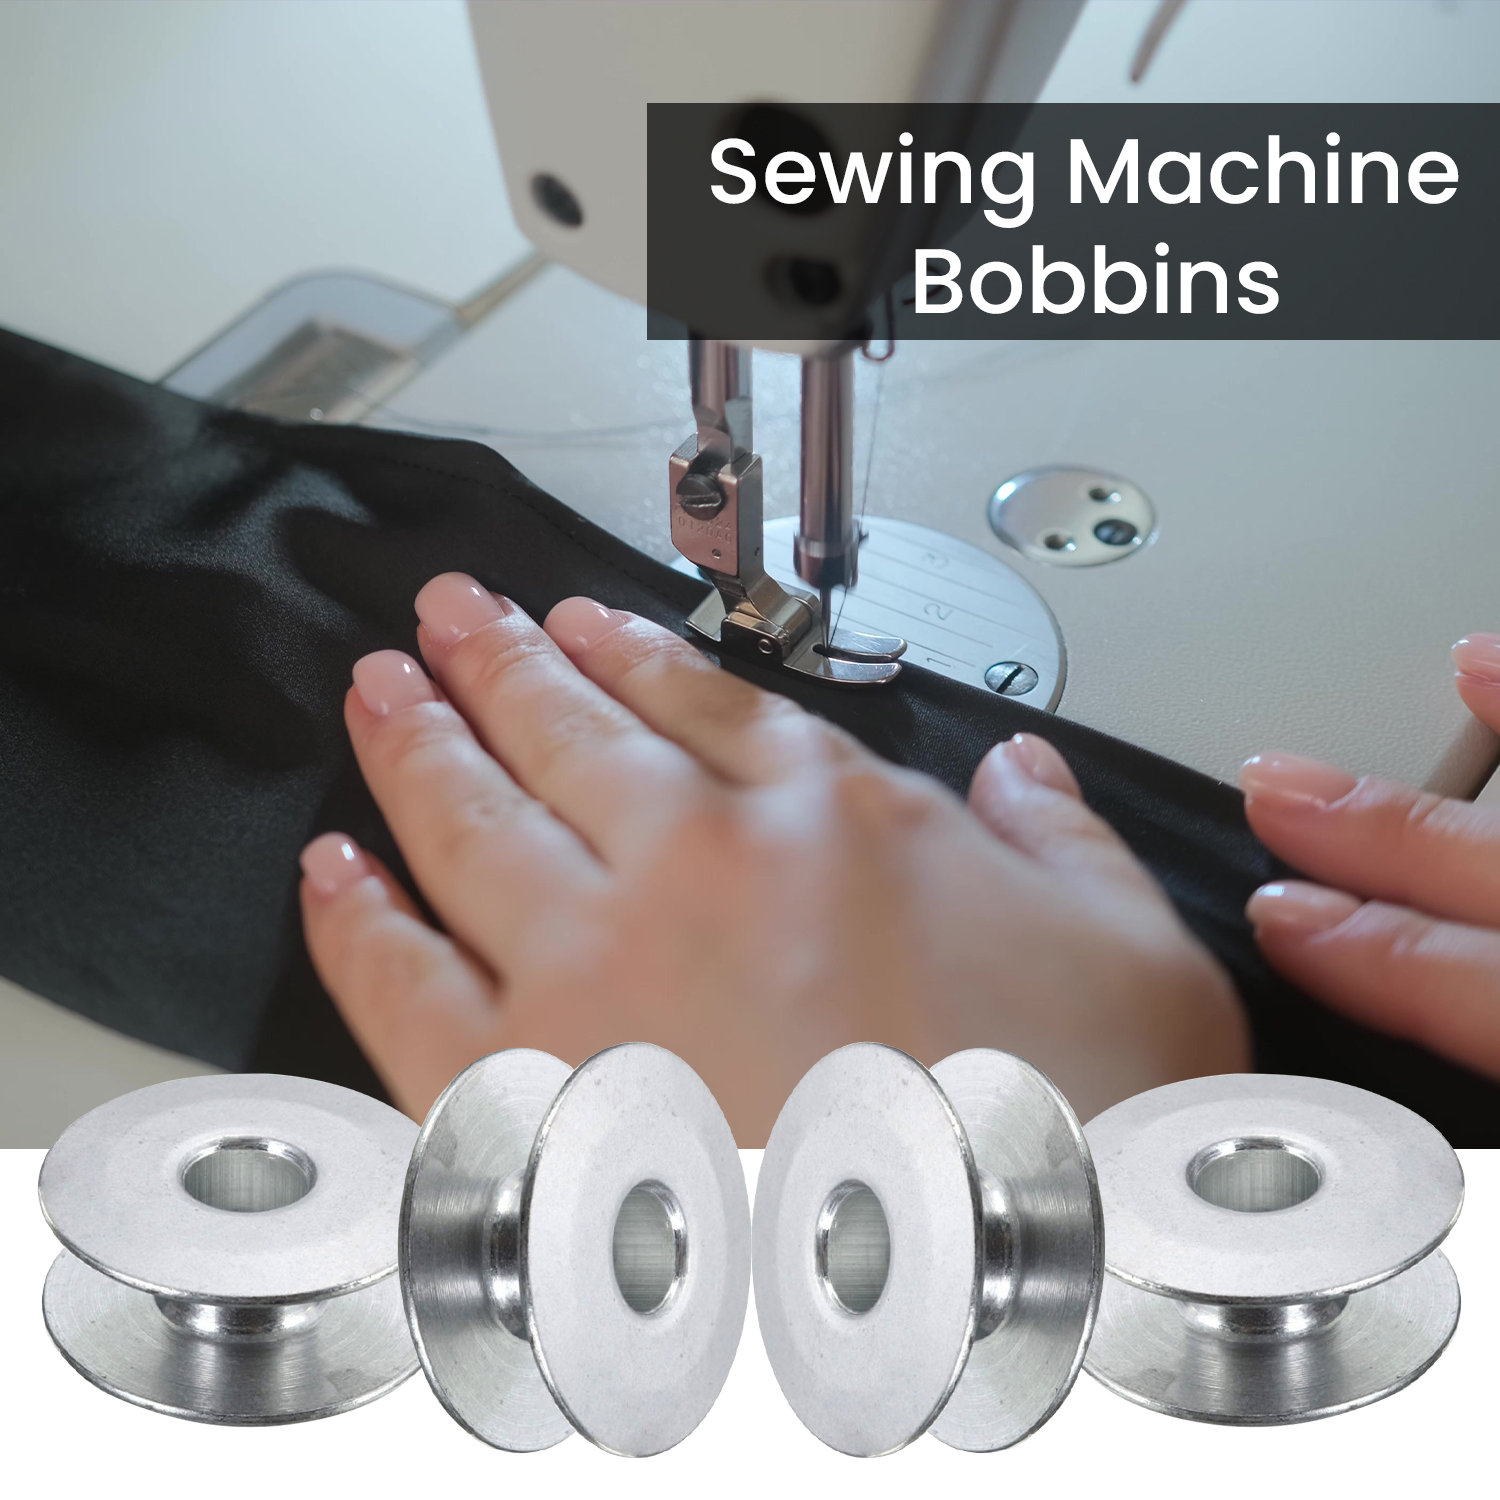  Sewing Machine Bobbin Case, Sewing Notions and Supplies 5Pcs A  Set Bobbin Holder Case for Electric Industrial Sewing Machine